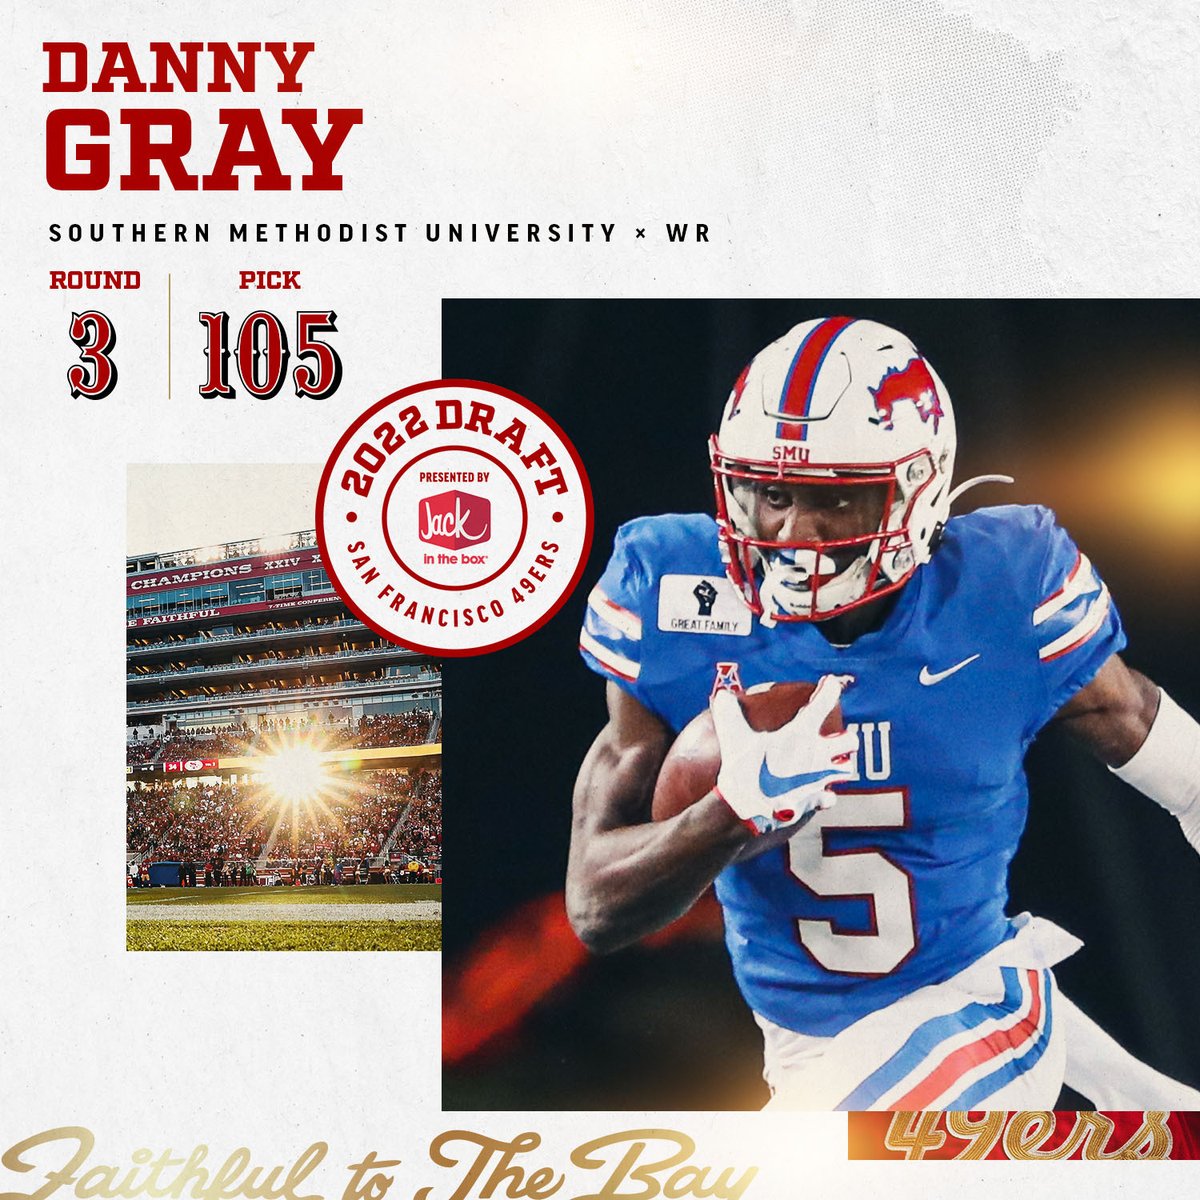 Adding another weapon to the offense Welcome to The Bay @DGray_5! #49ersDraft